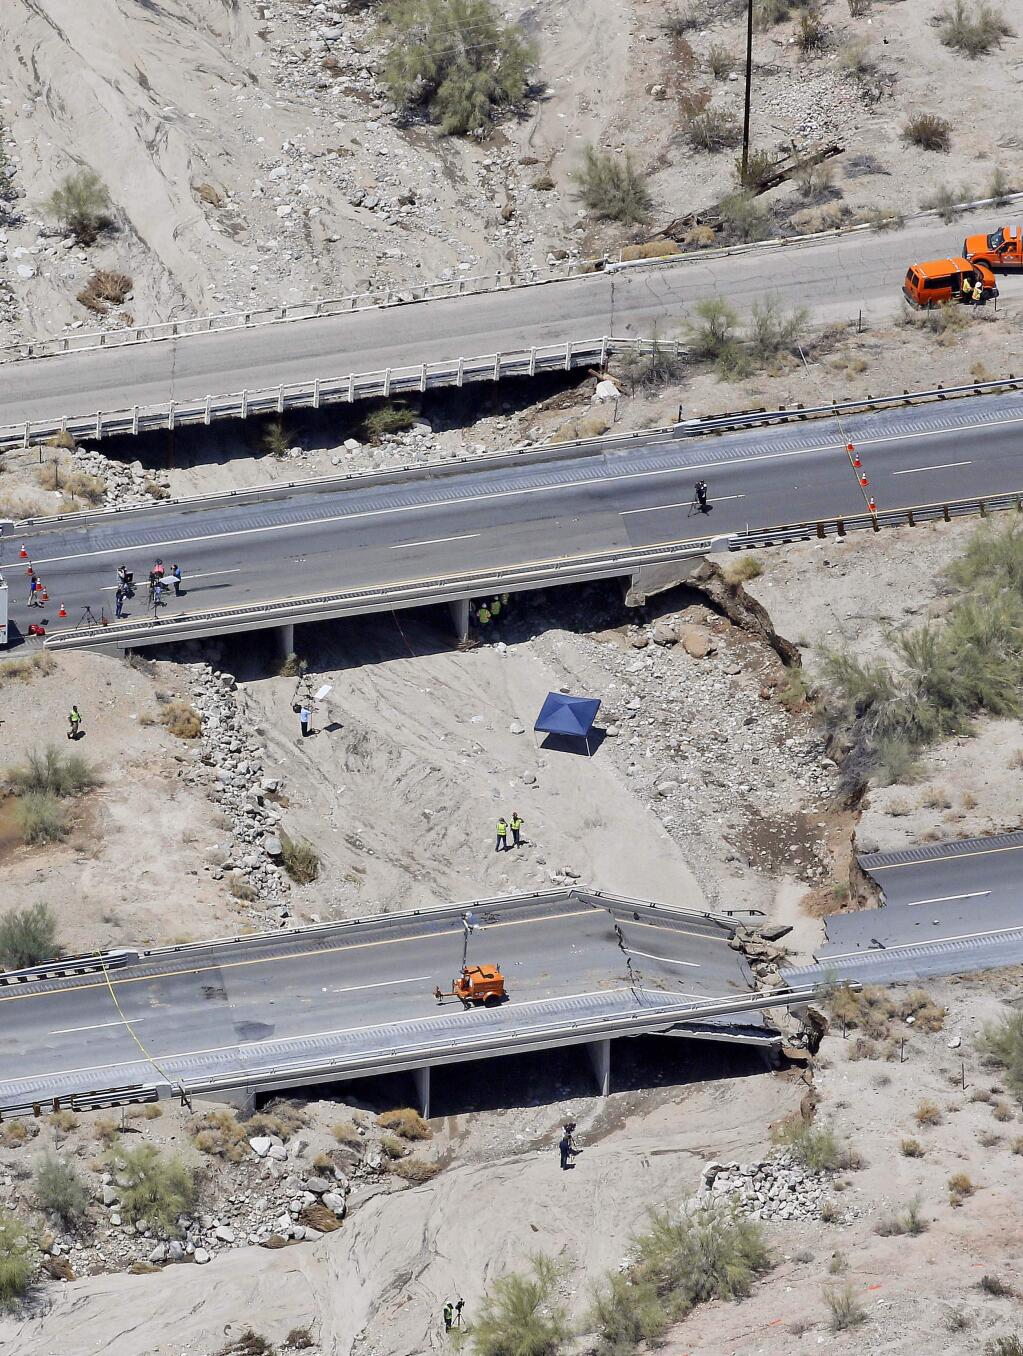 An aerial photo showing the section of Interstate 10 in Southern California that collapsed during a recent storm. (MATT YORK / Associated Press)